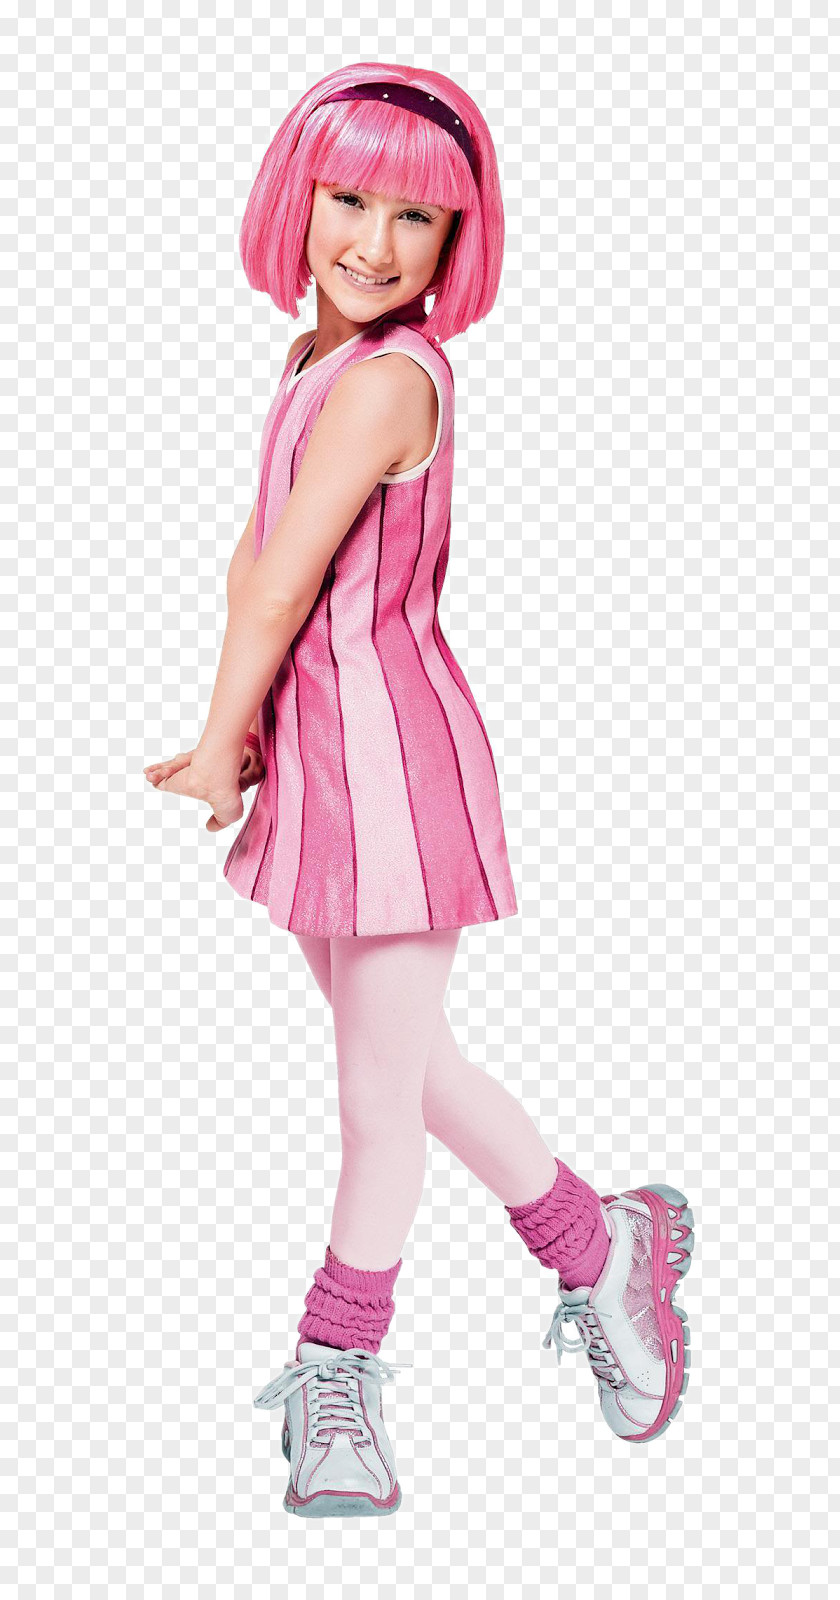 Lazytown Julianna Rose Mauriello LazyTown Stephanie Television Show Children's Series PNG